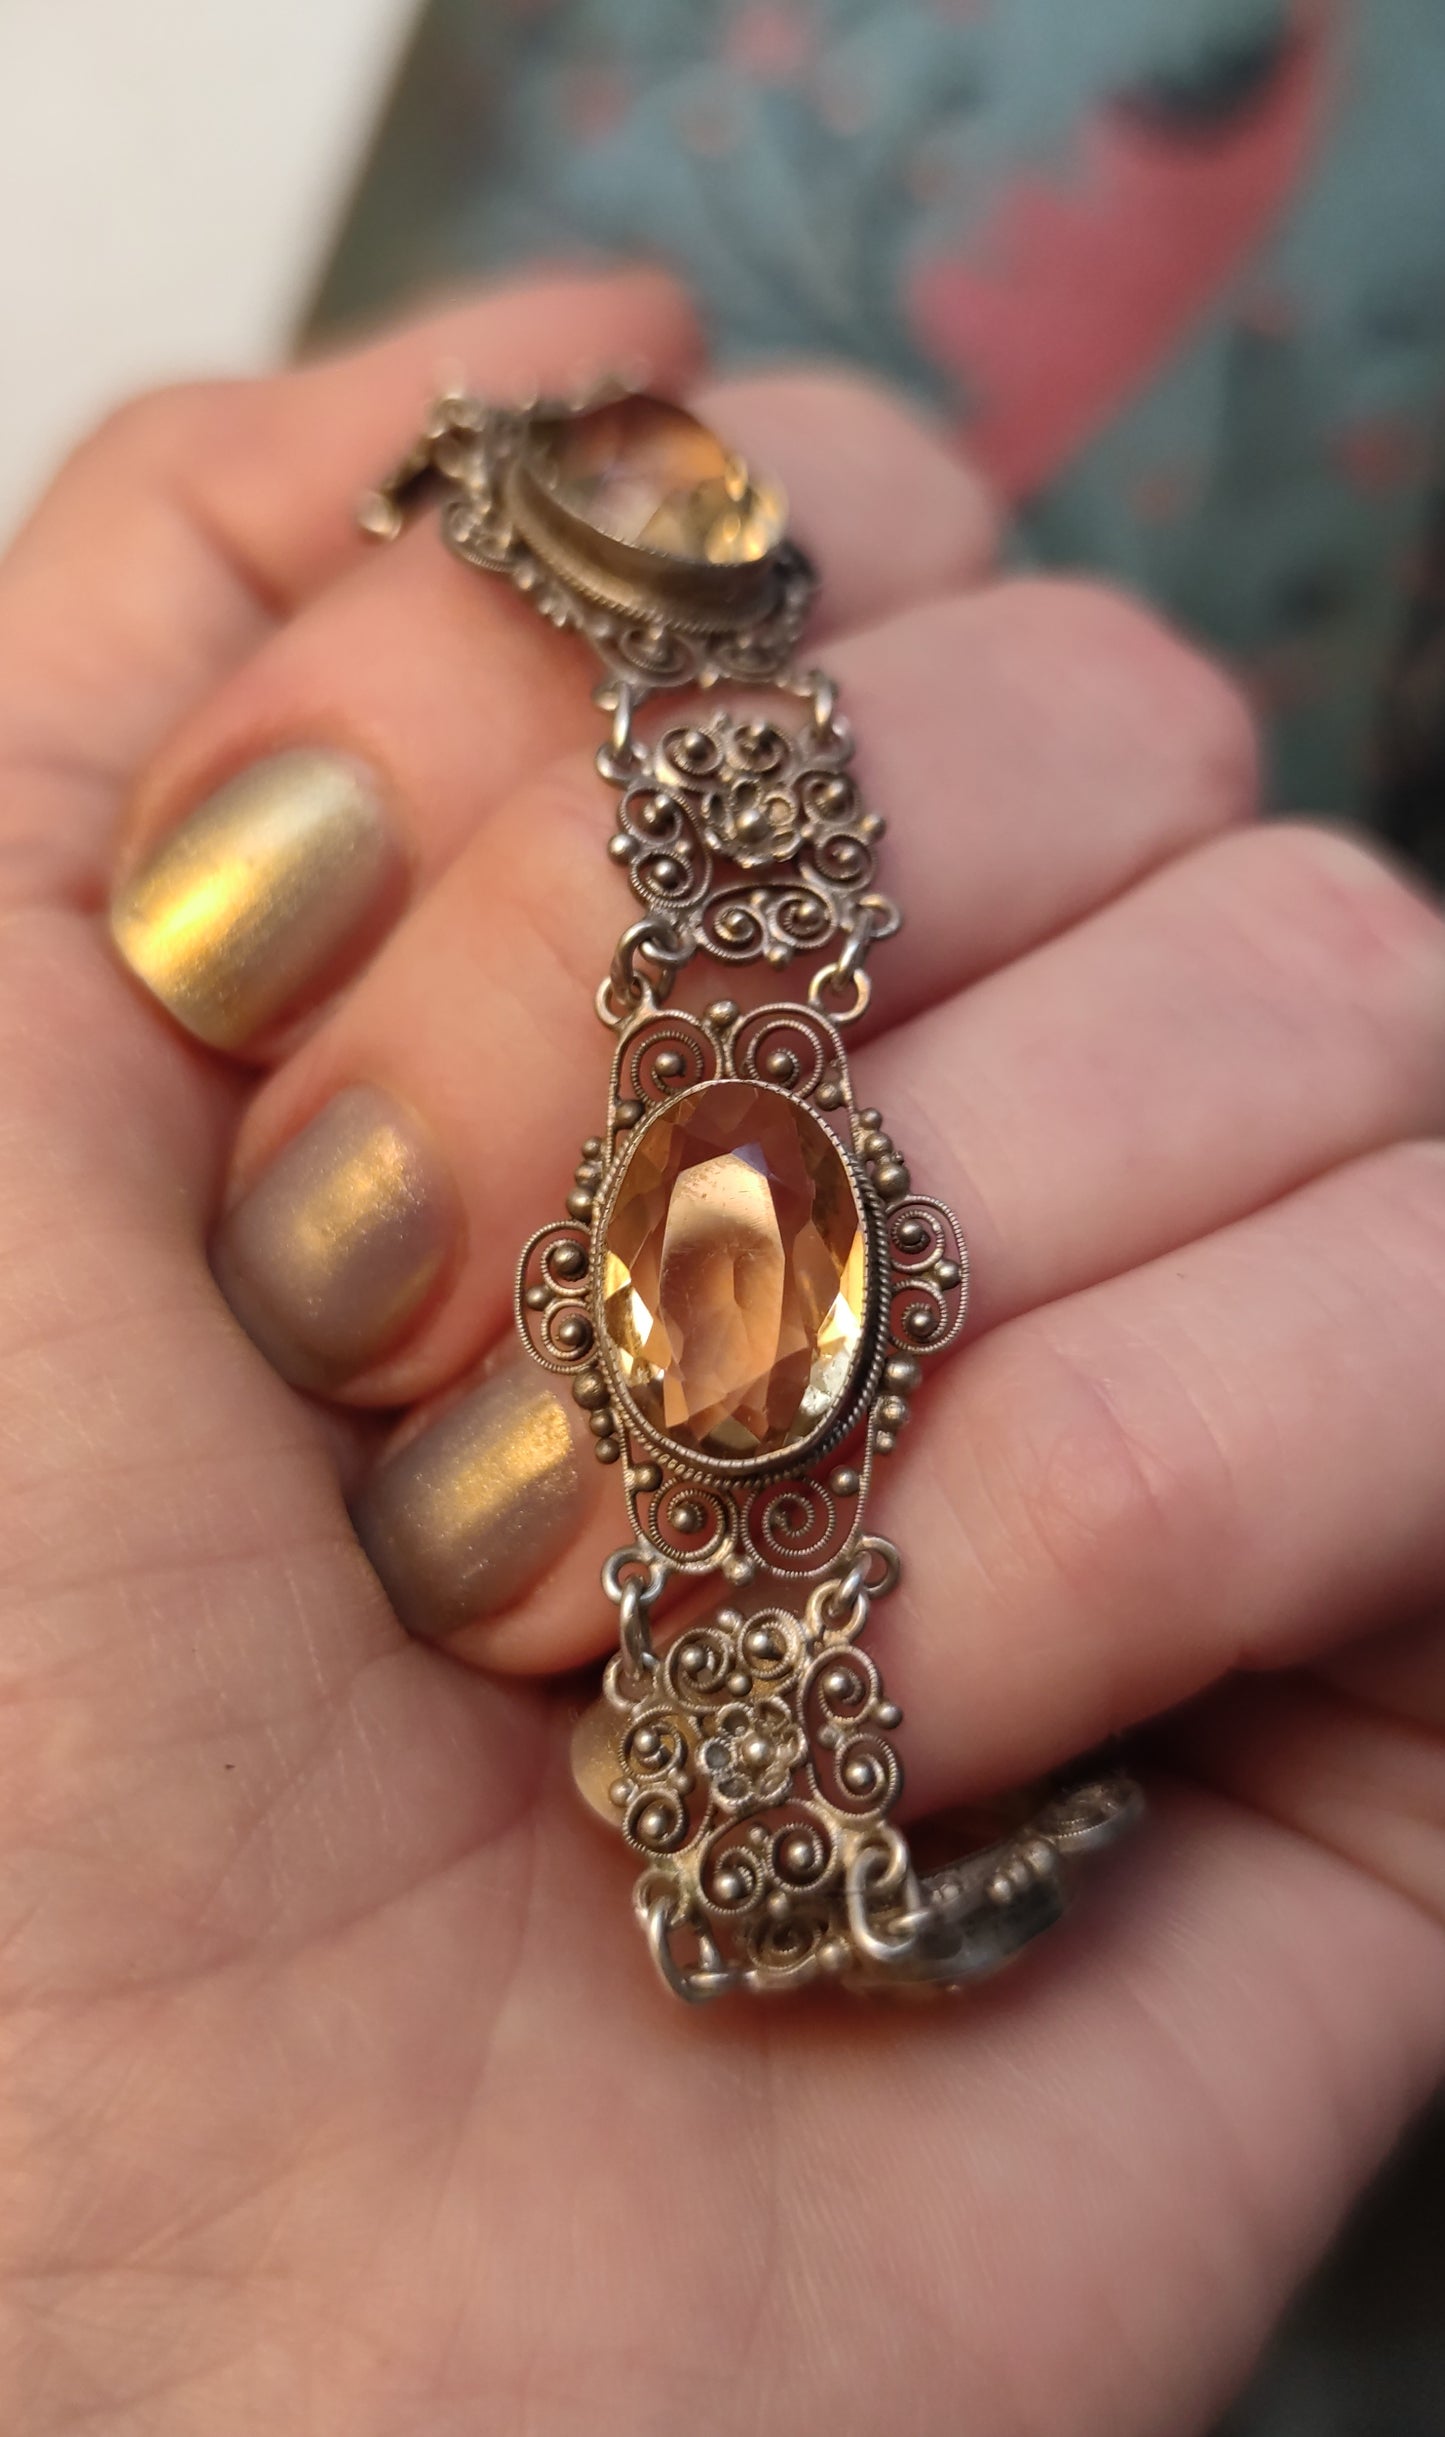 Filigree bracelet from Florence with citrines.